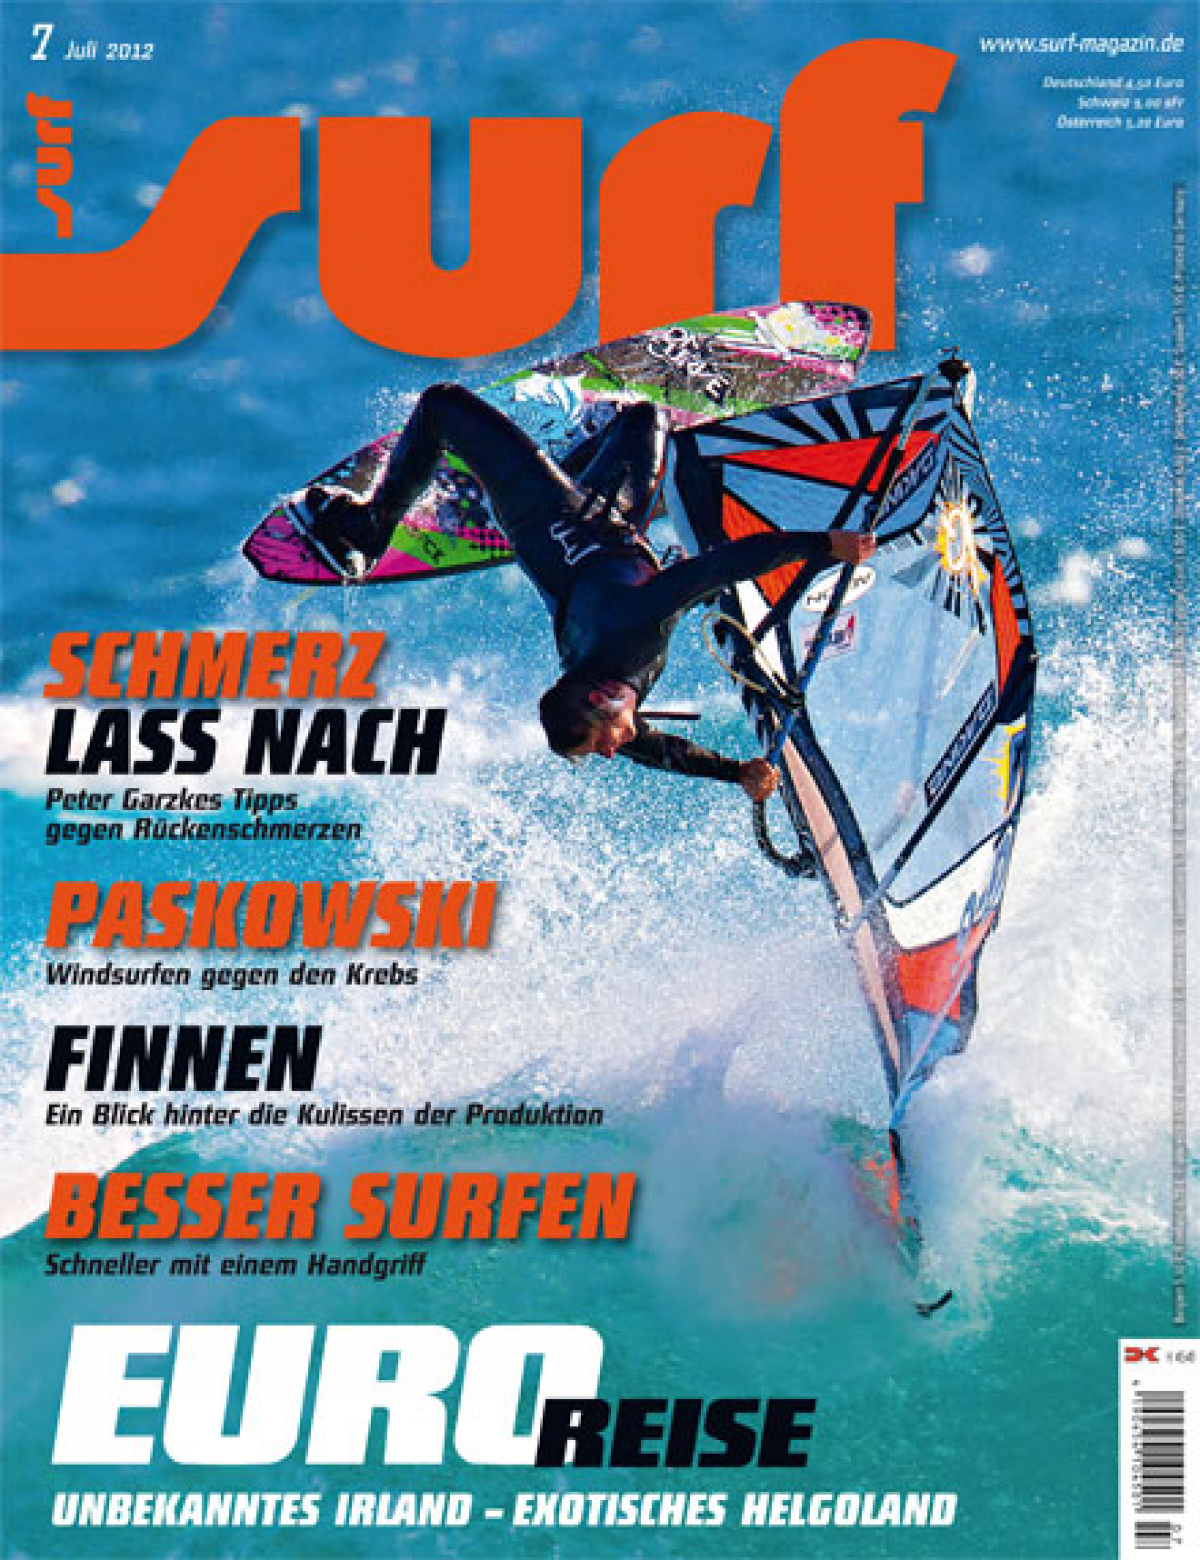 Freestyle-Special - Surf Magazin